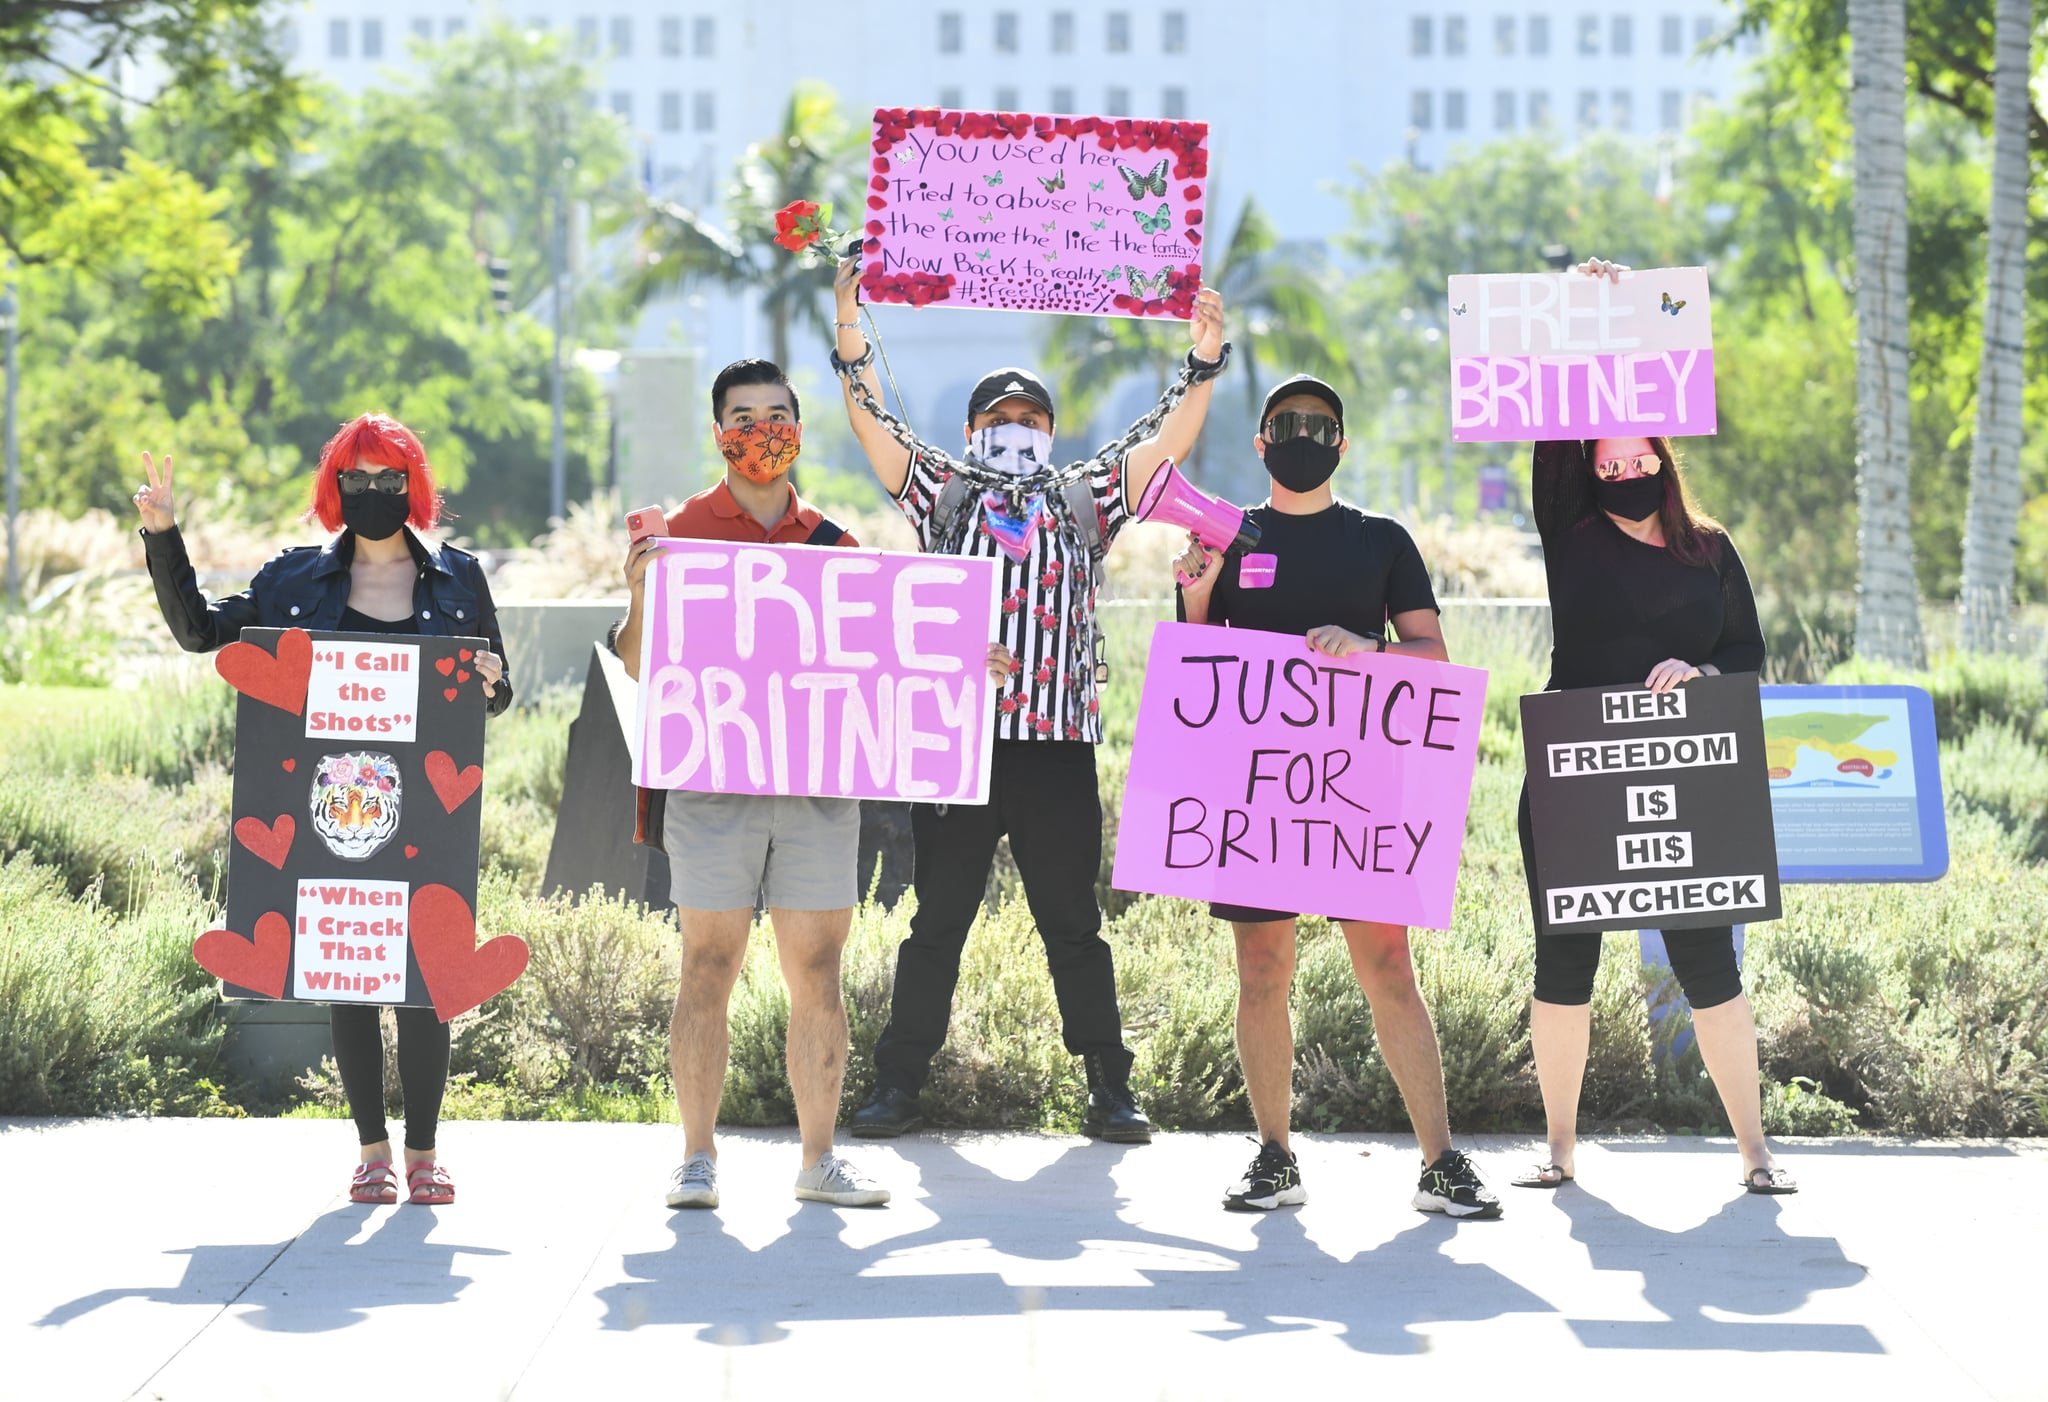 LOS ANGELES, CALIFORNIA - OCTOBER 14: Protesters at the #FreeBritney protest outside of the courthouse on October 14, 2020 in Los Angeles, California. (Photo by Rodin Eckenroth/Getty Images)